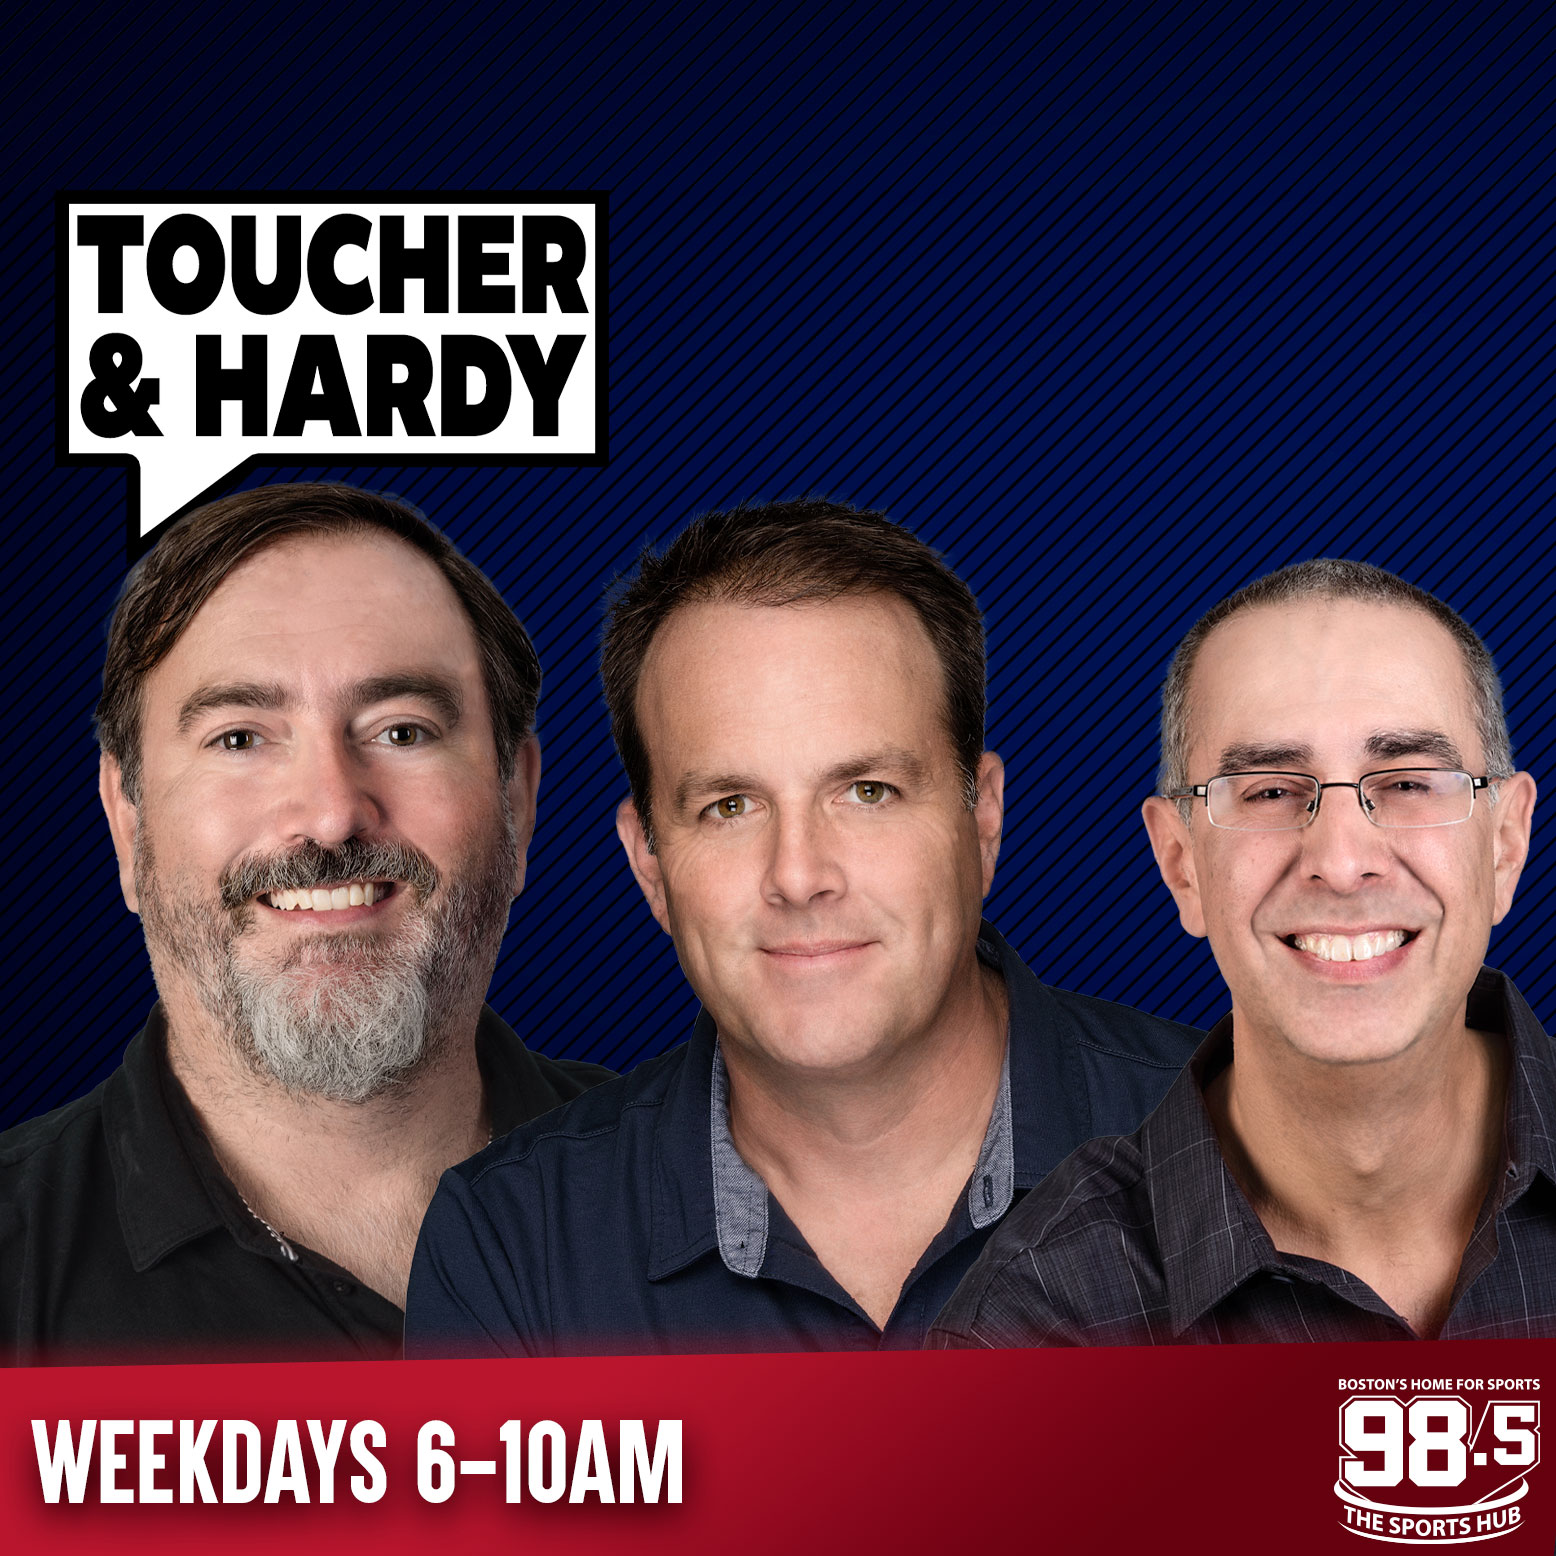 Nick hits the streets | Mike Gorman joins Toucher & Hardy | “Feed the Bird! “- 5/22 (Hour 3)